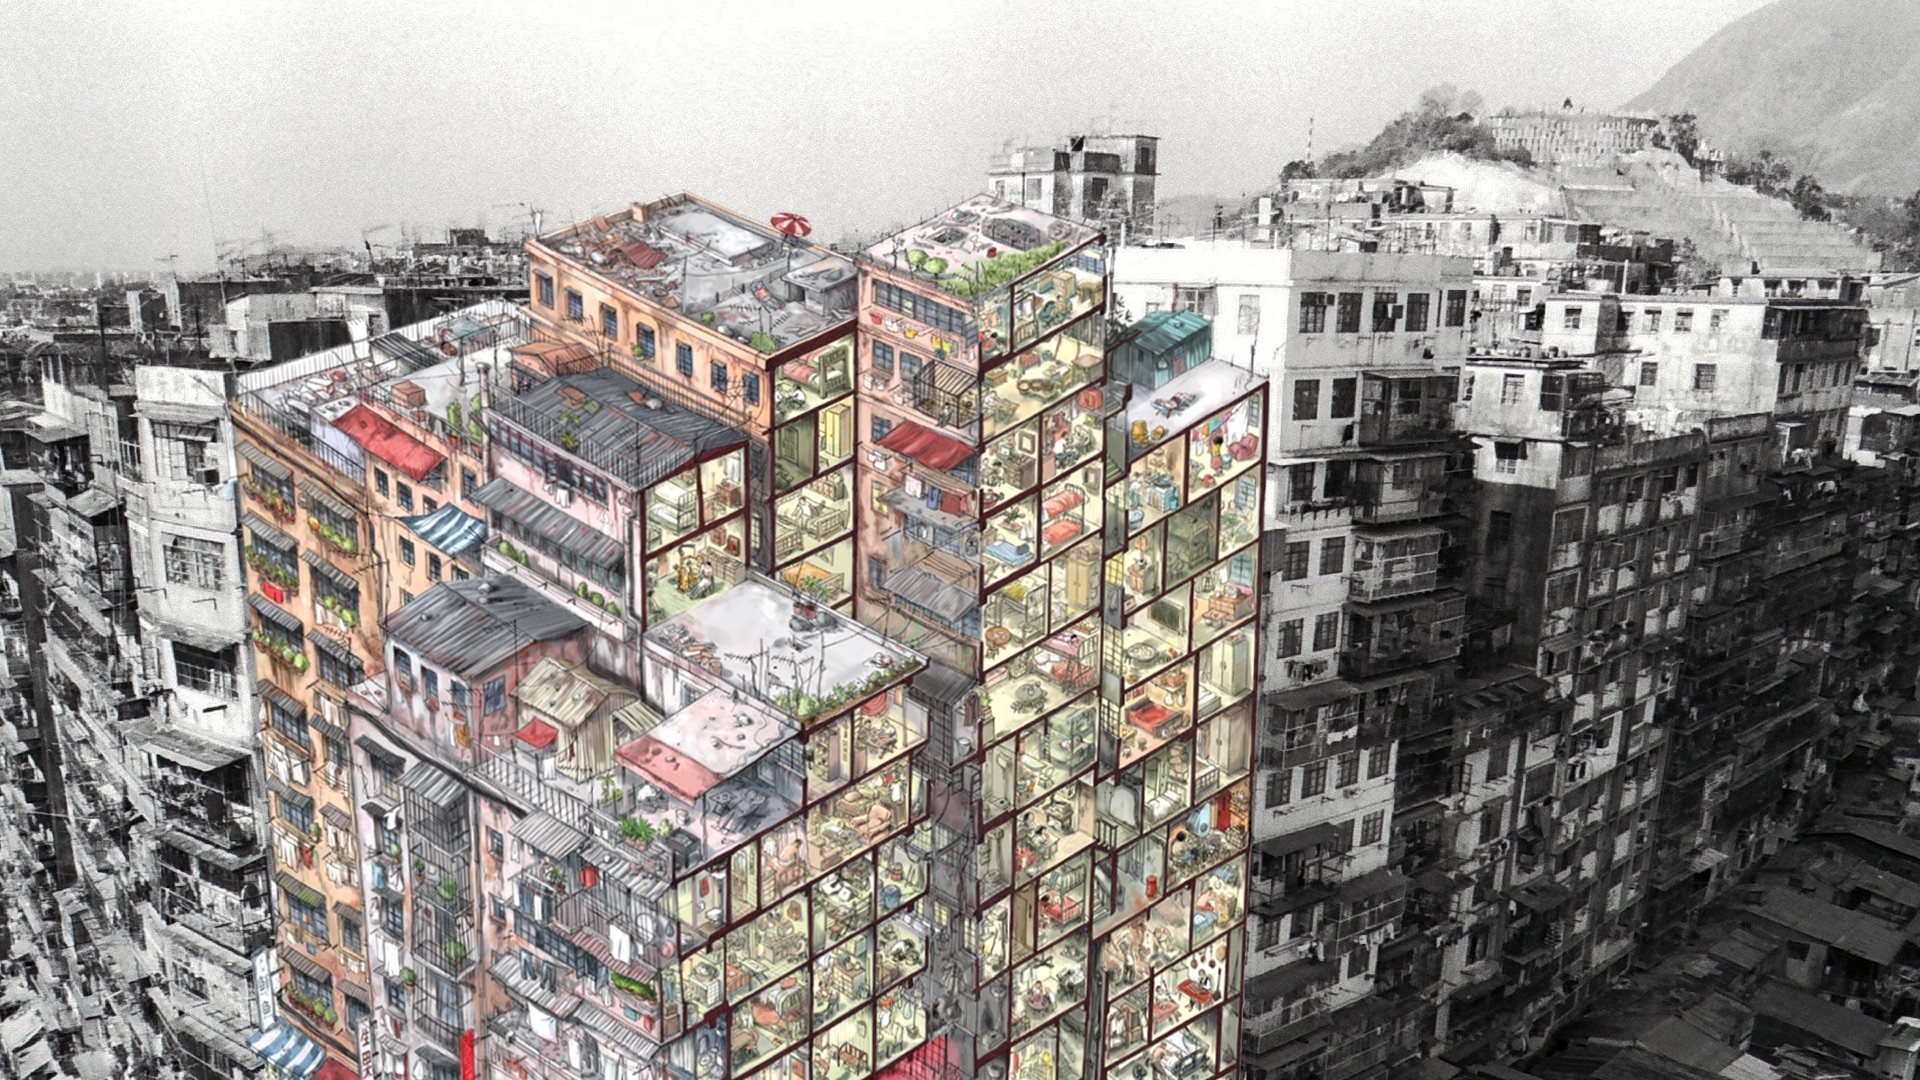 The Kowloon Walled City in Hong Kong was once considered the densest settlement in the world.